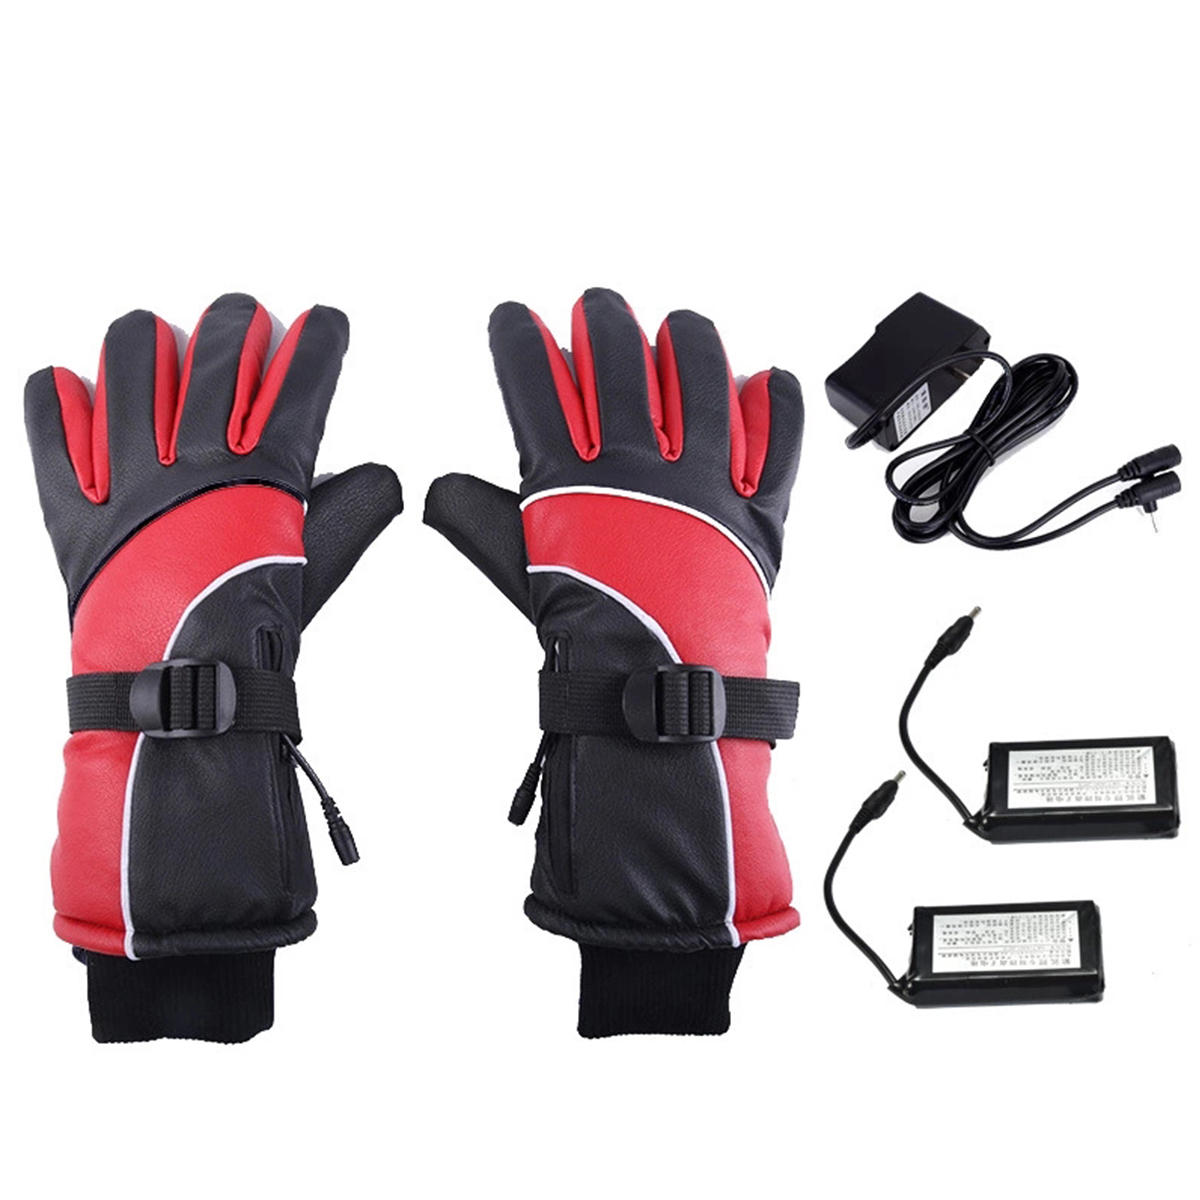 Image of 4000/6000mAh Electric Battery Heating Gloves Men Women Winter Heated Warmer Sport Protector